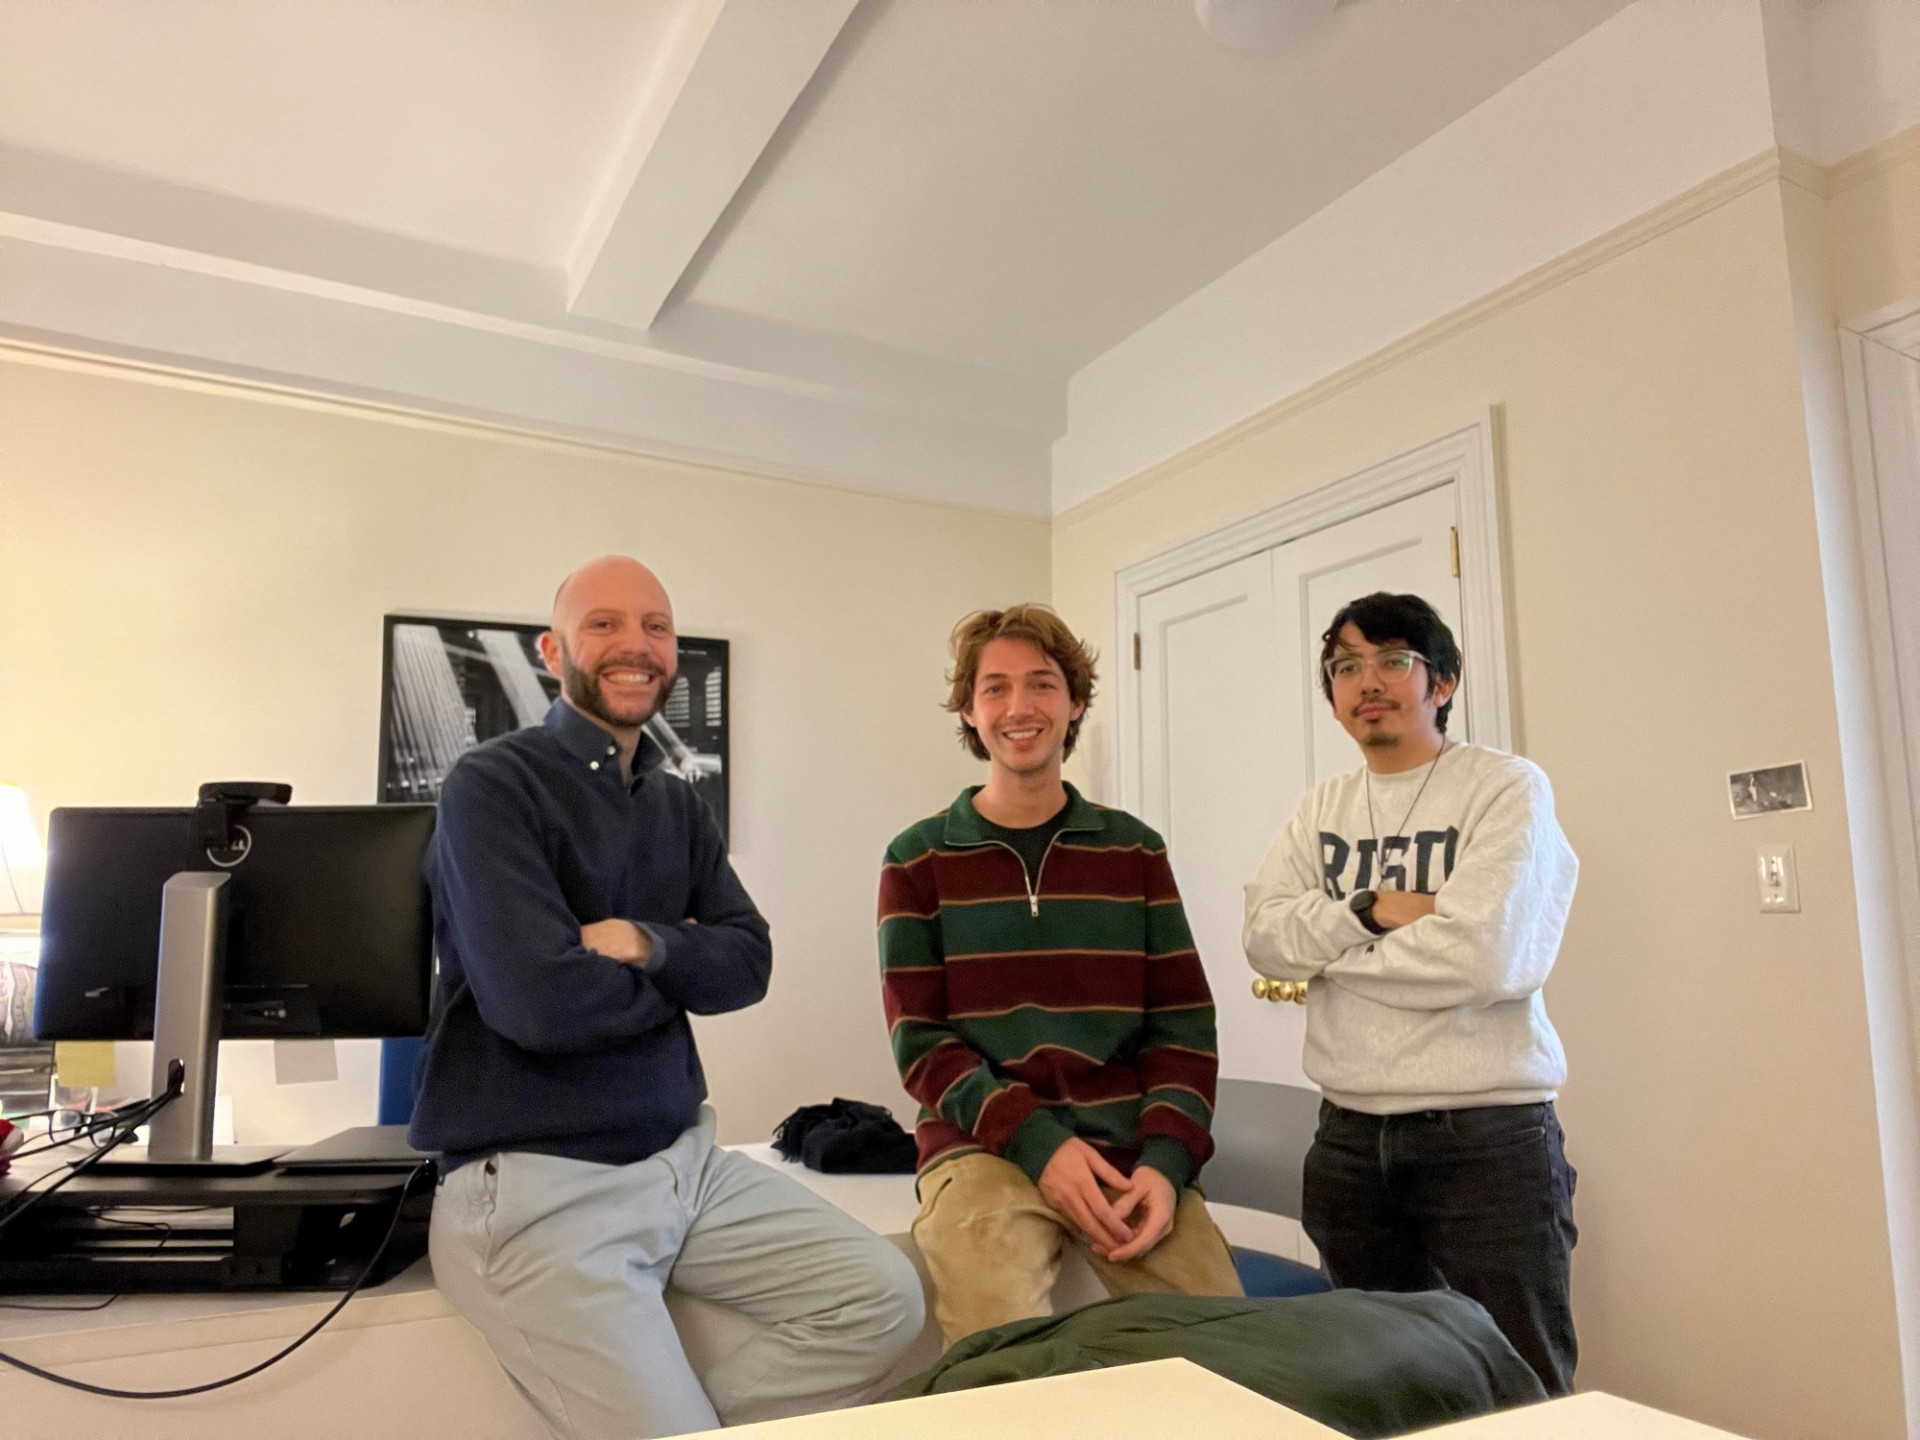 Daniel Allalemdjian (left) Director for Sustainability and Transportation in the Office of Sustainability, with Daniel Leal (middle) and Edgar Flores (right), undergraduate interns from the Sustainable Development program.